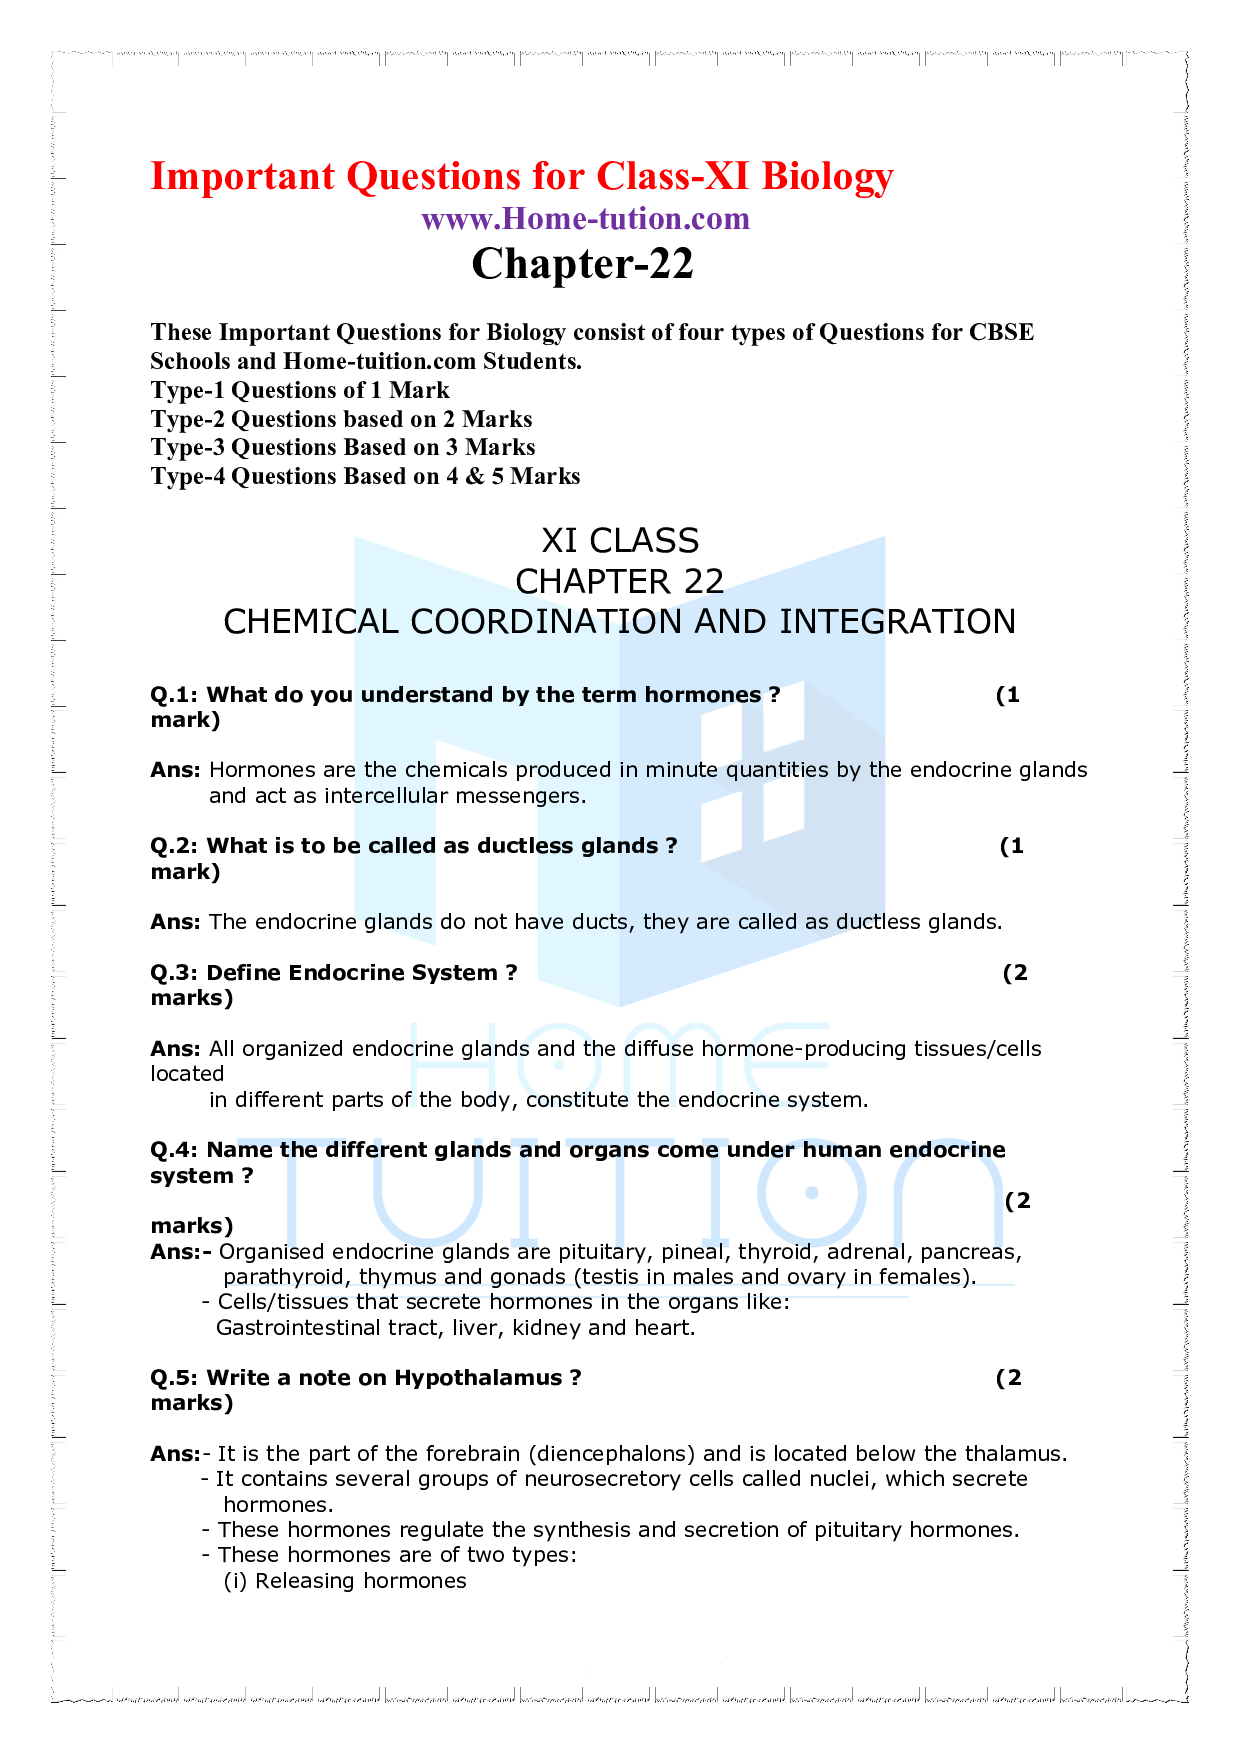 Chapter 22 Chemical Coordination and Integration Important Questions